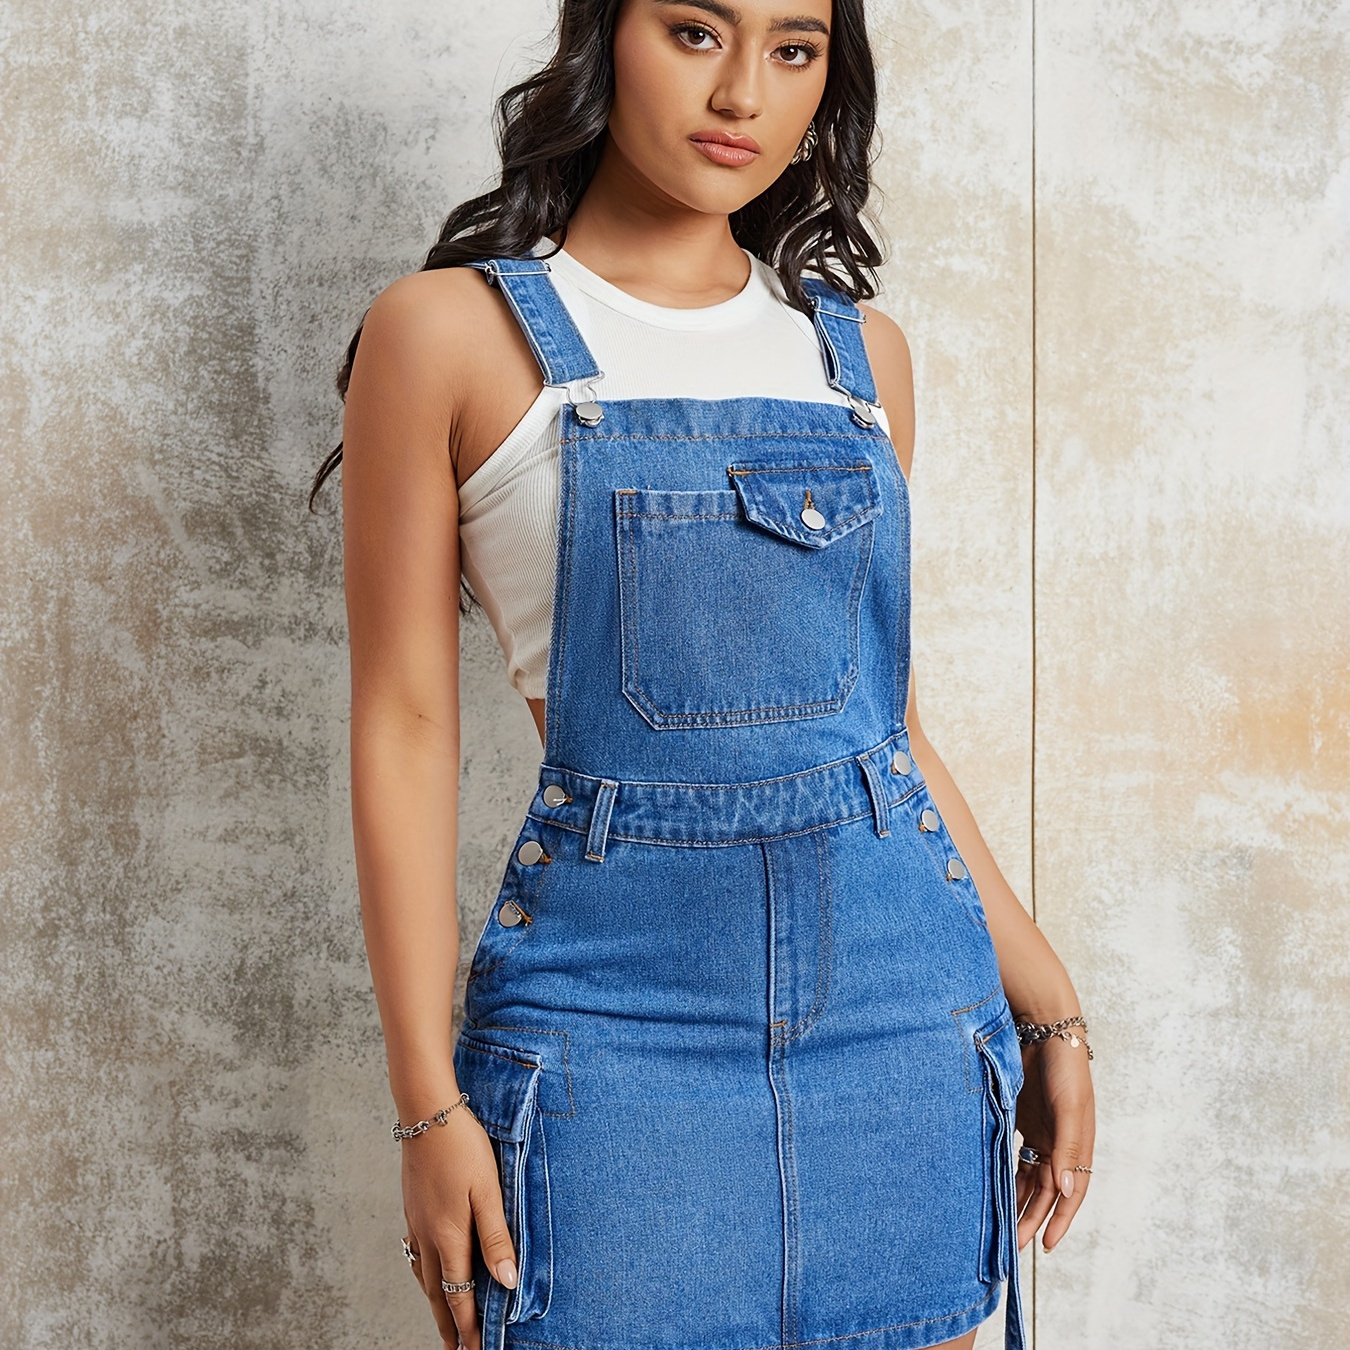 

Women's Sexy Plain Washed Blue Denim Overall Dress, Sleeveless Mini Jean Pinafore With Pocket Detail, Adjustable Straps, Casual Summer Outfit